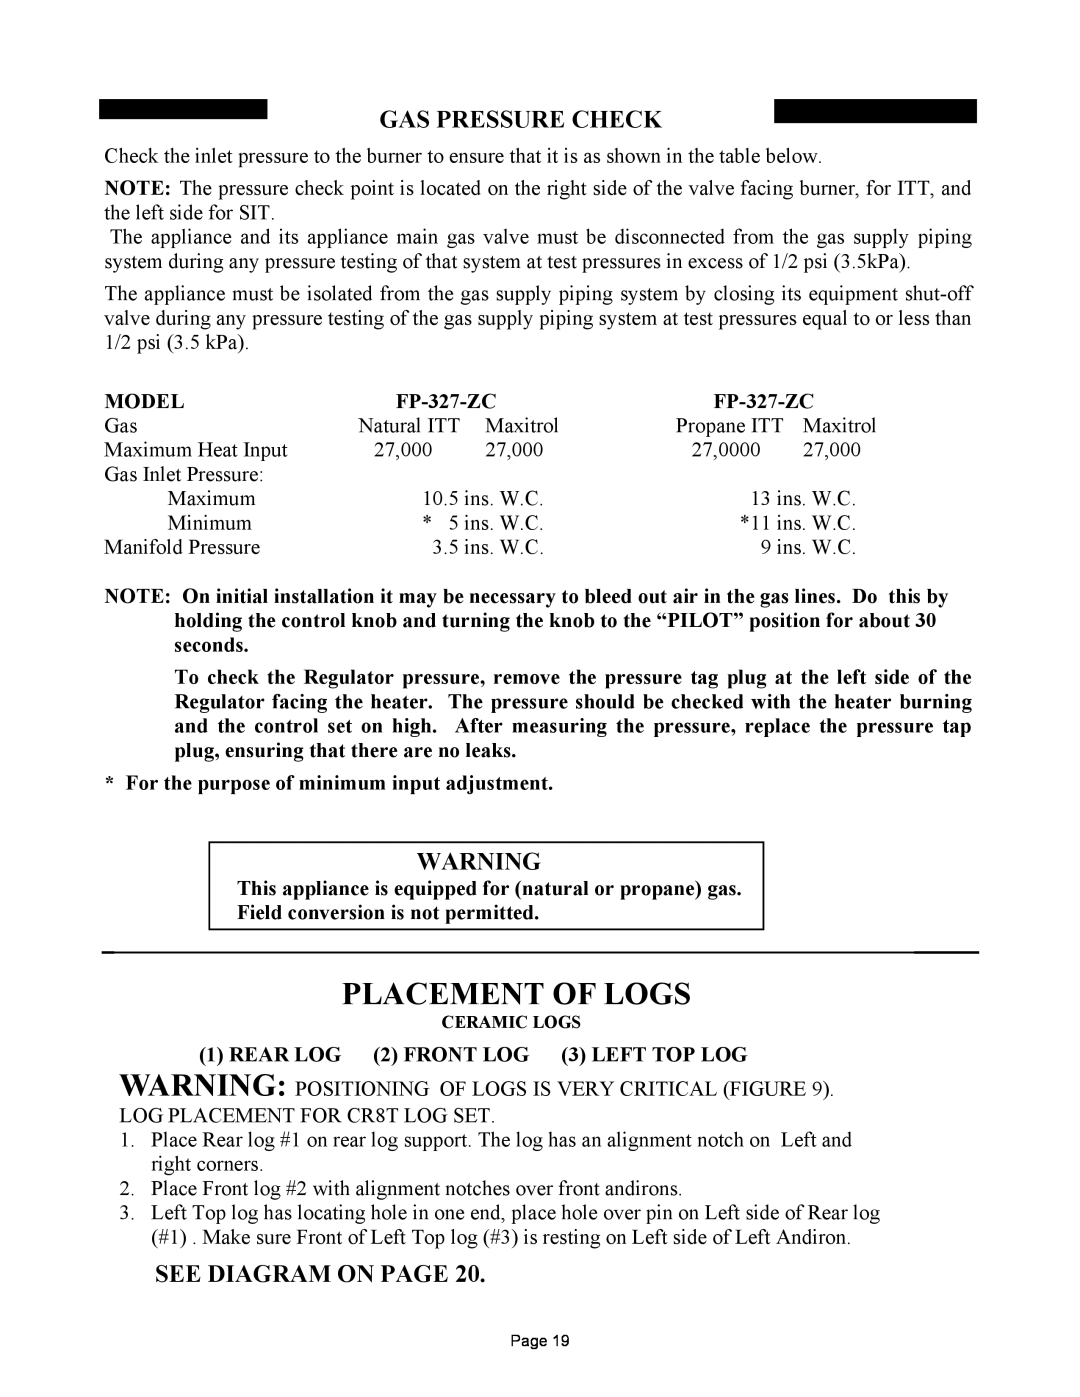 New Buck Corporation MODEL FP-327-ZC manual Placement Of Logs, Gas Pressure Check, See Diagram On Page 